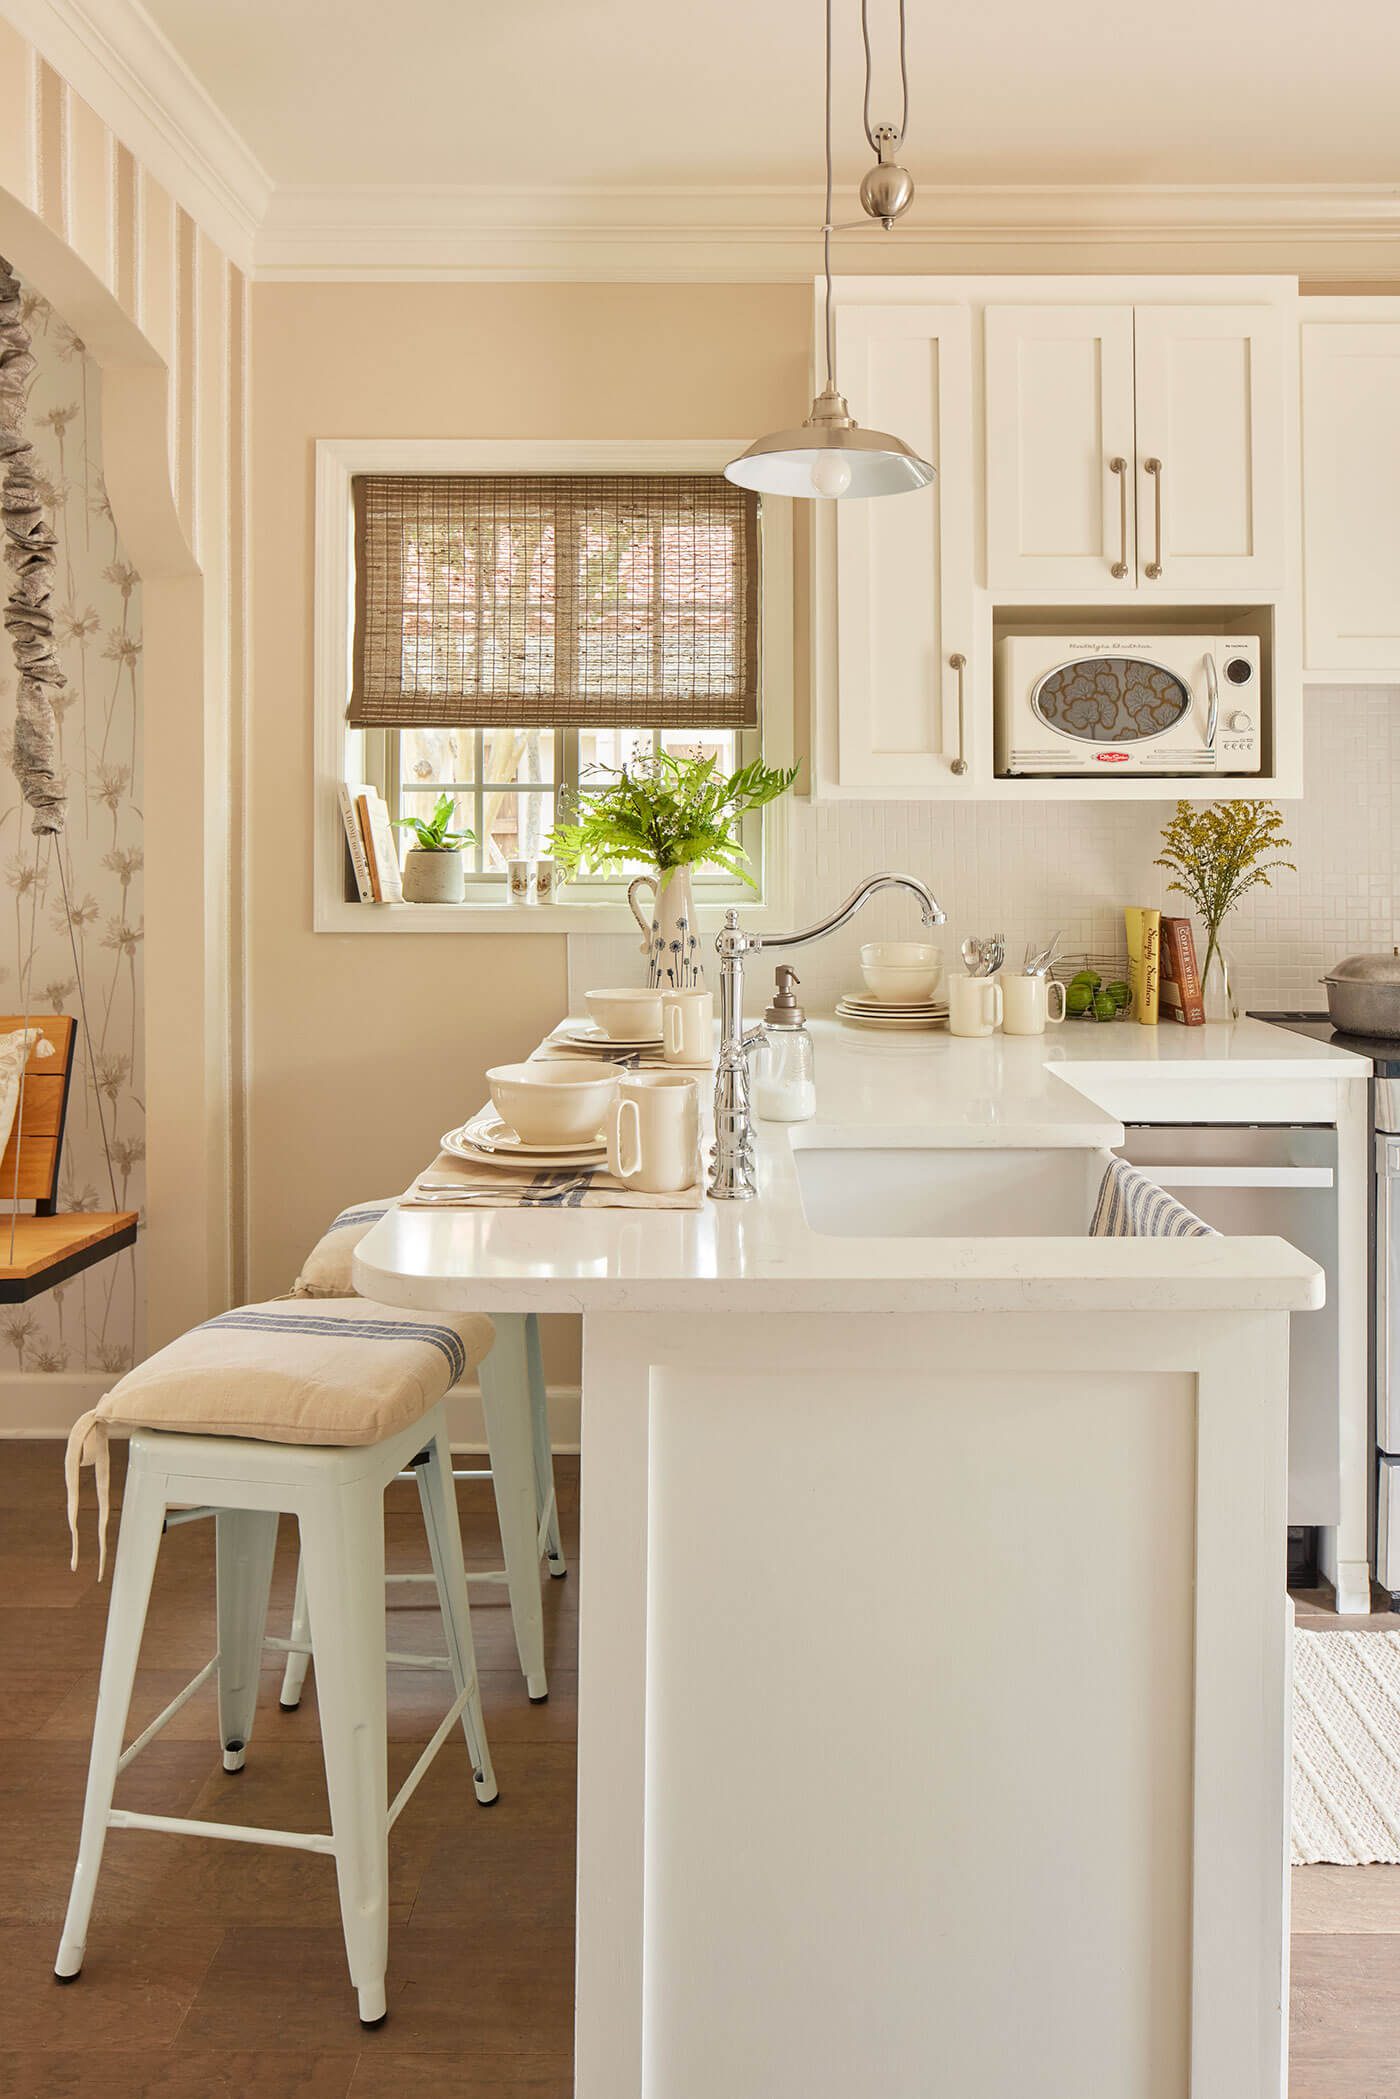 Kitchen with white countertops, cream walls and farmhouse style